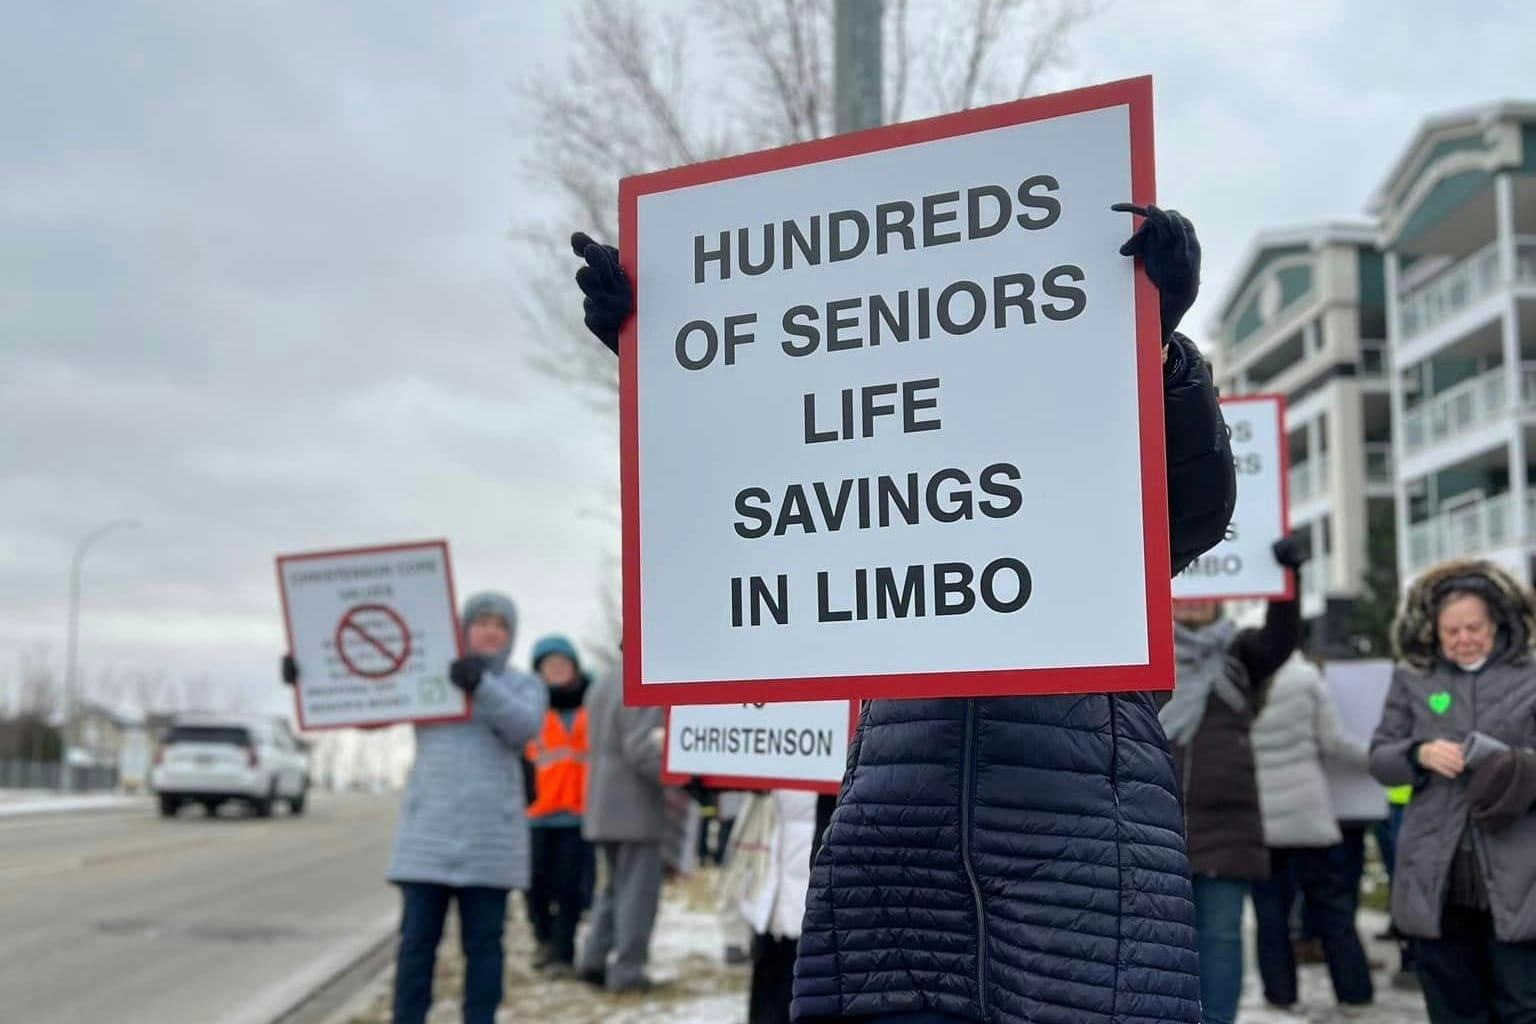 A protestor holds a sign that reads "hundreds of seniors life savings in limbo".